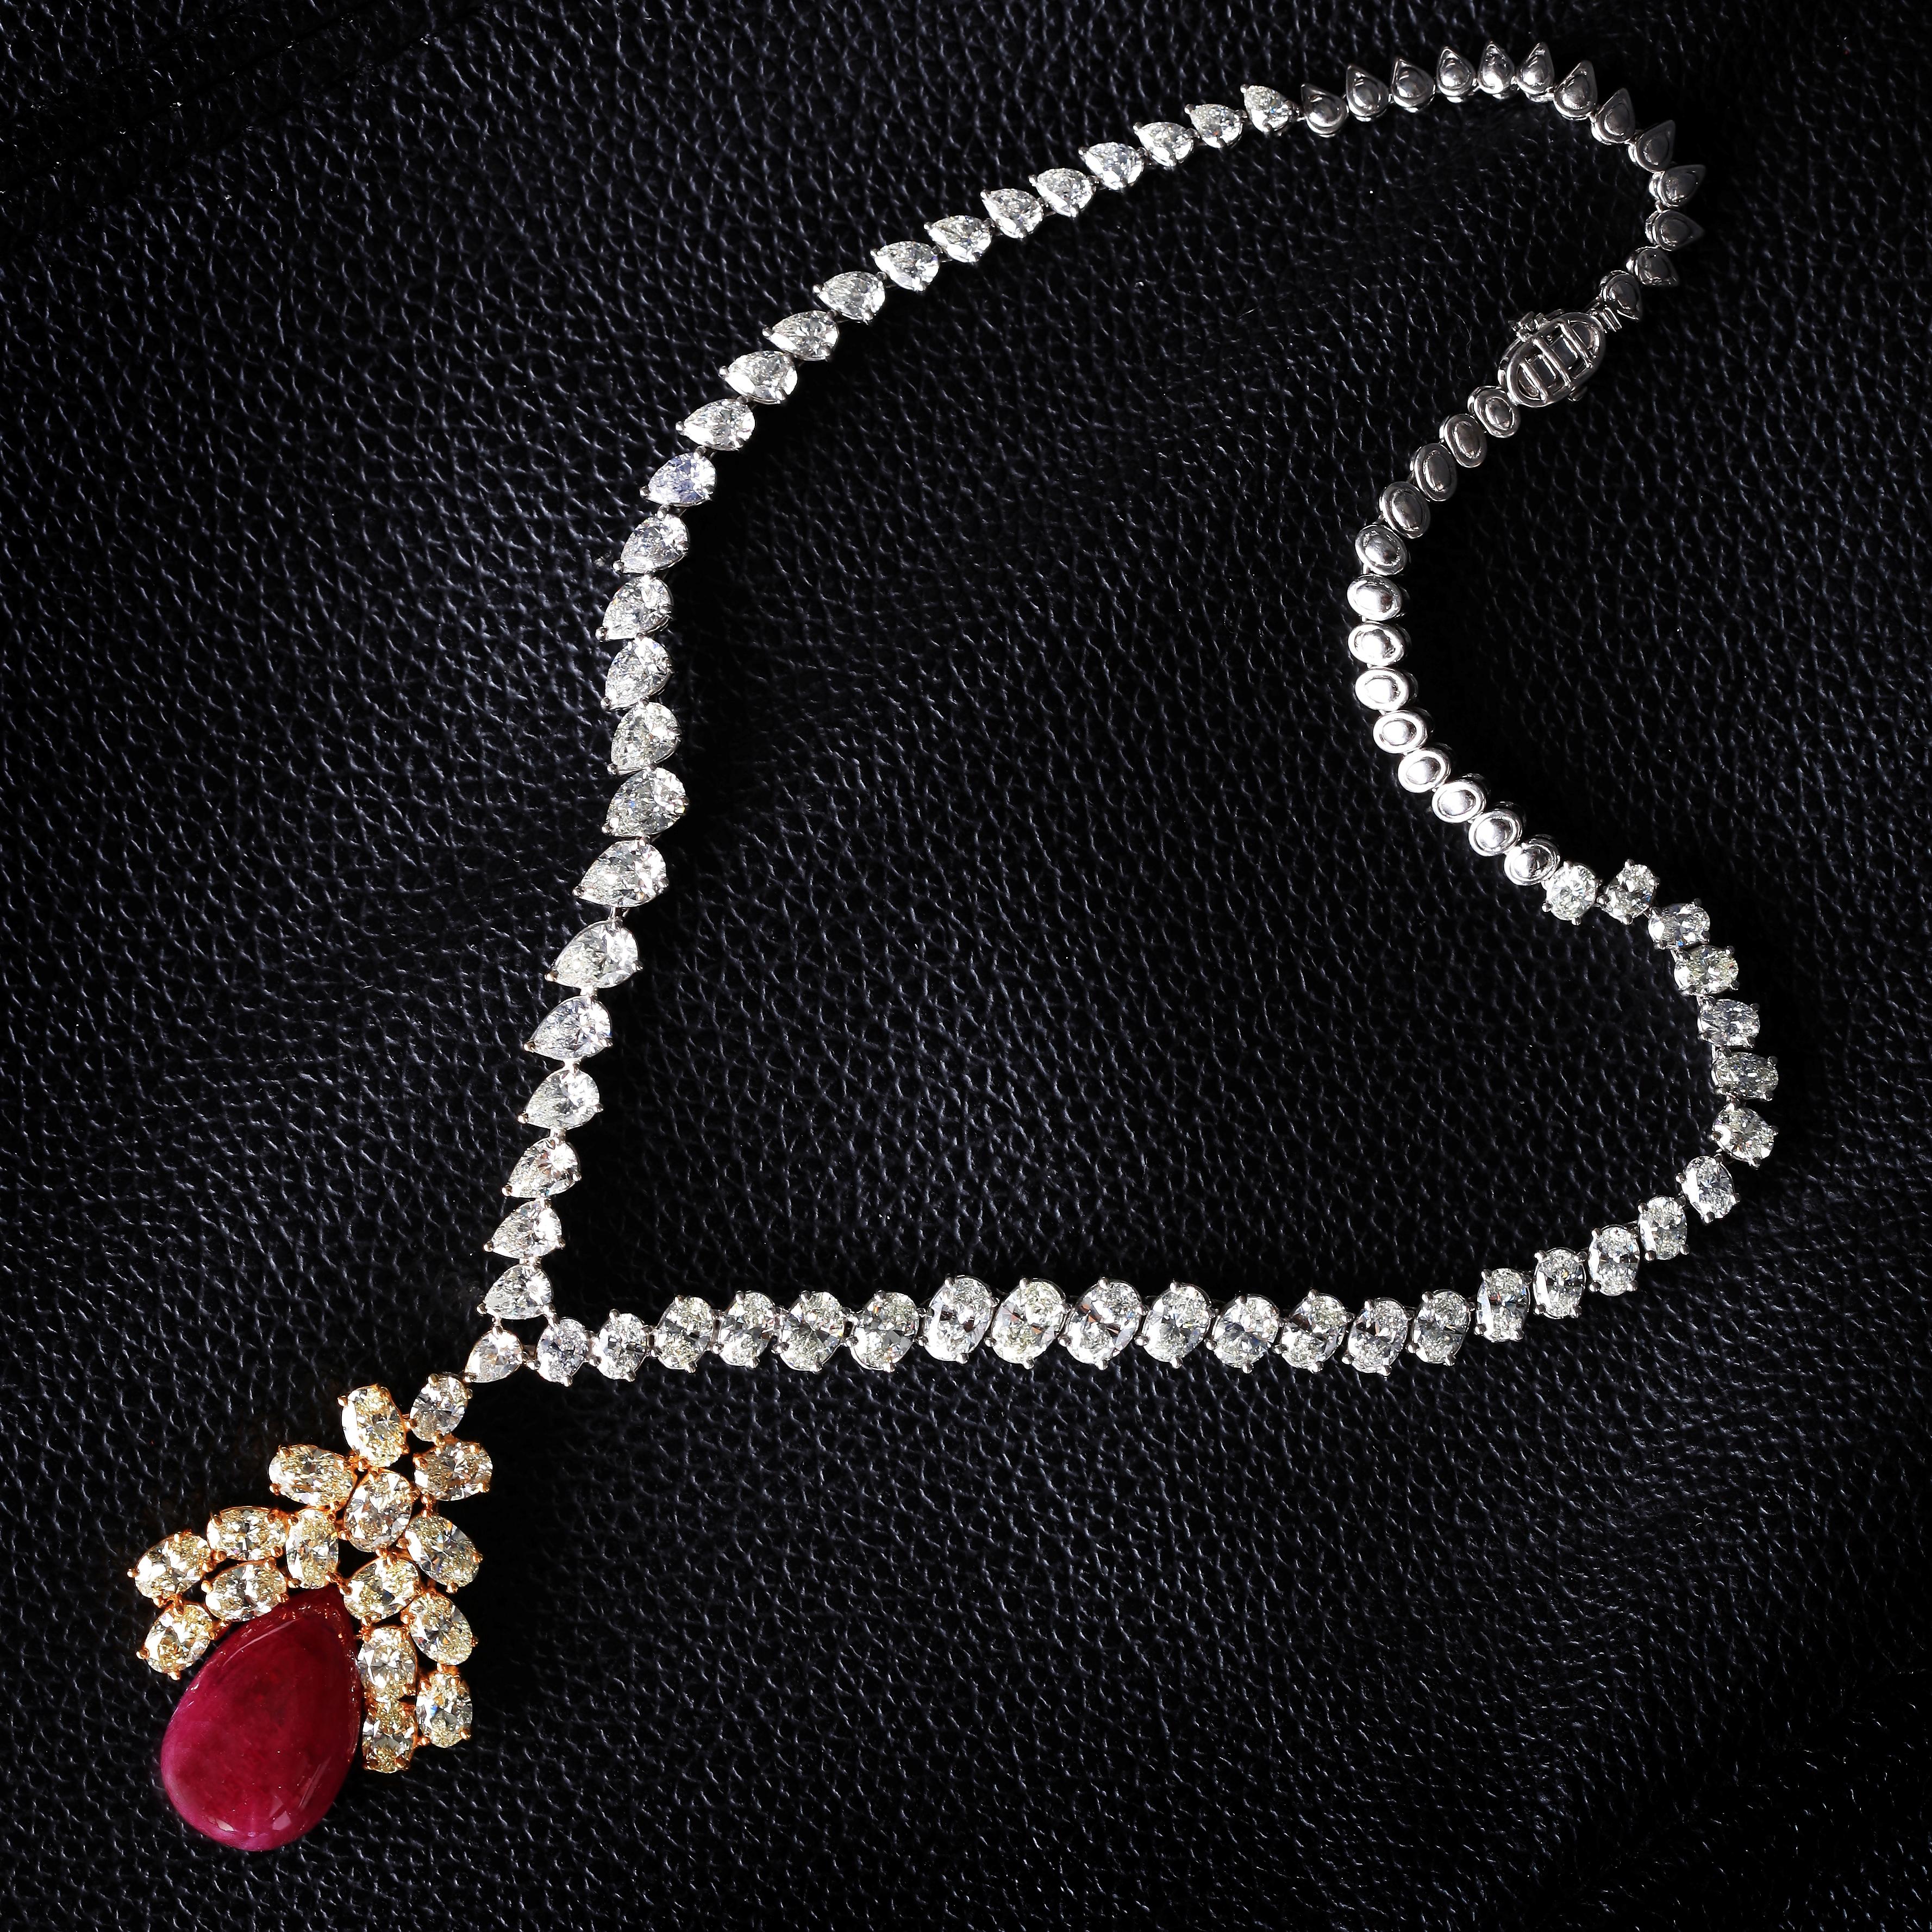 Women's Beauvince Bloom Necklace & Earrings Suite (150.45 ct Rubies & Diamonds) in Gold For Sale